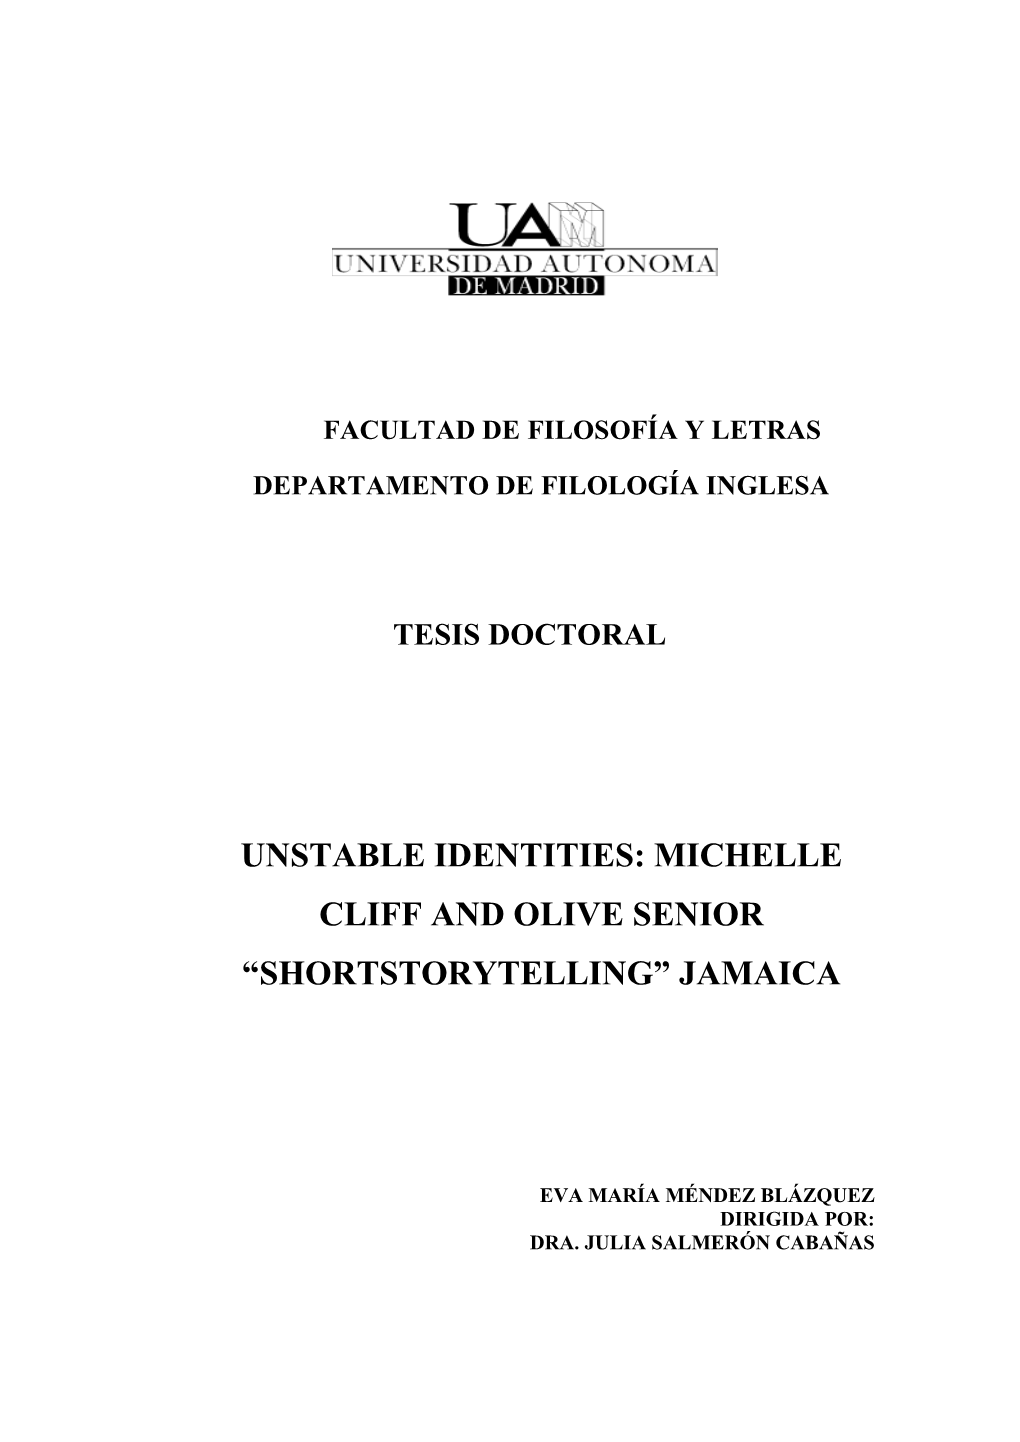 Unstable Identities: Michelle Cliff and Olive Senior “Shortstorytelling” Jamaica